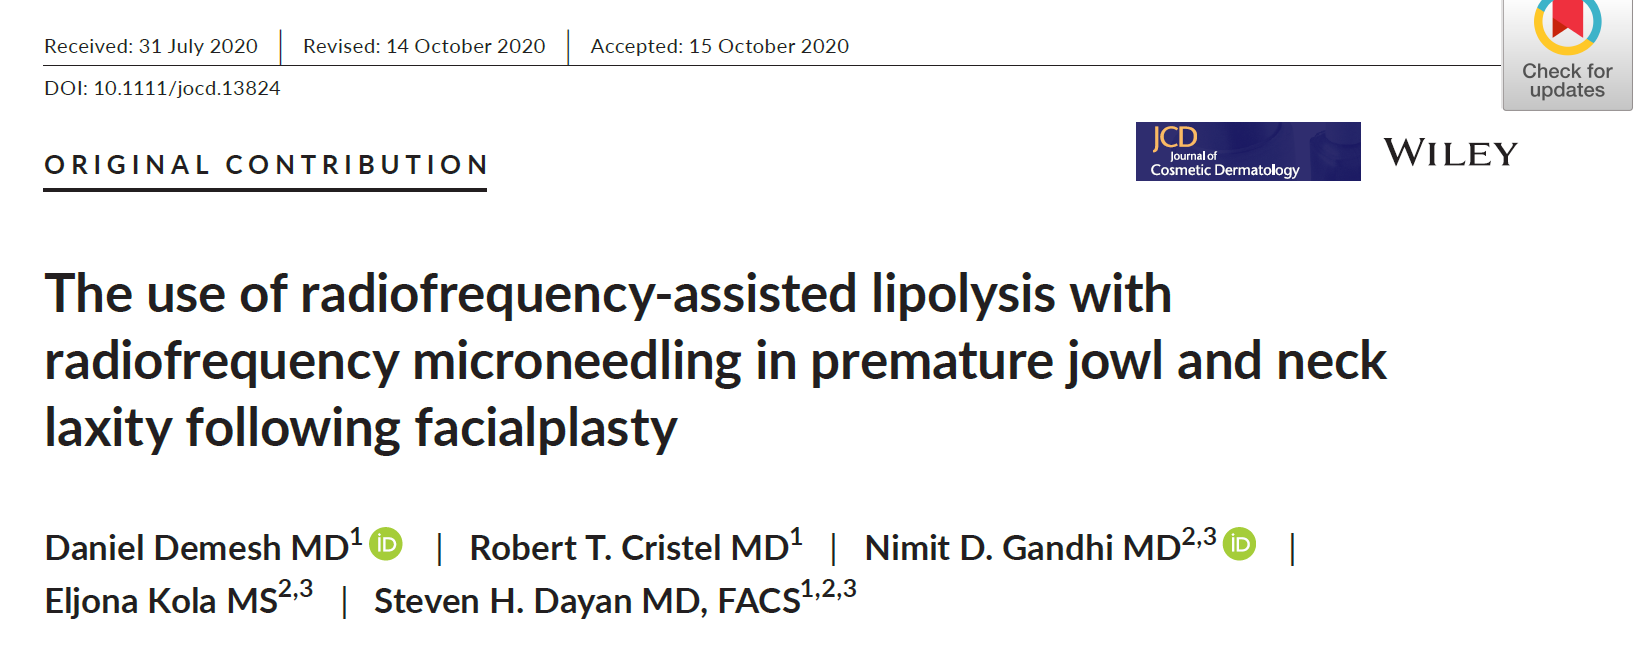 The use of radiofrequency-assisted lipolysis with radiofrequency microneedling in premature jowl and neck laxity following facialplasty